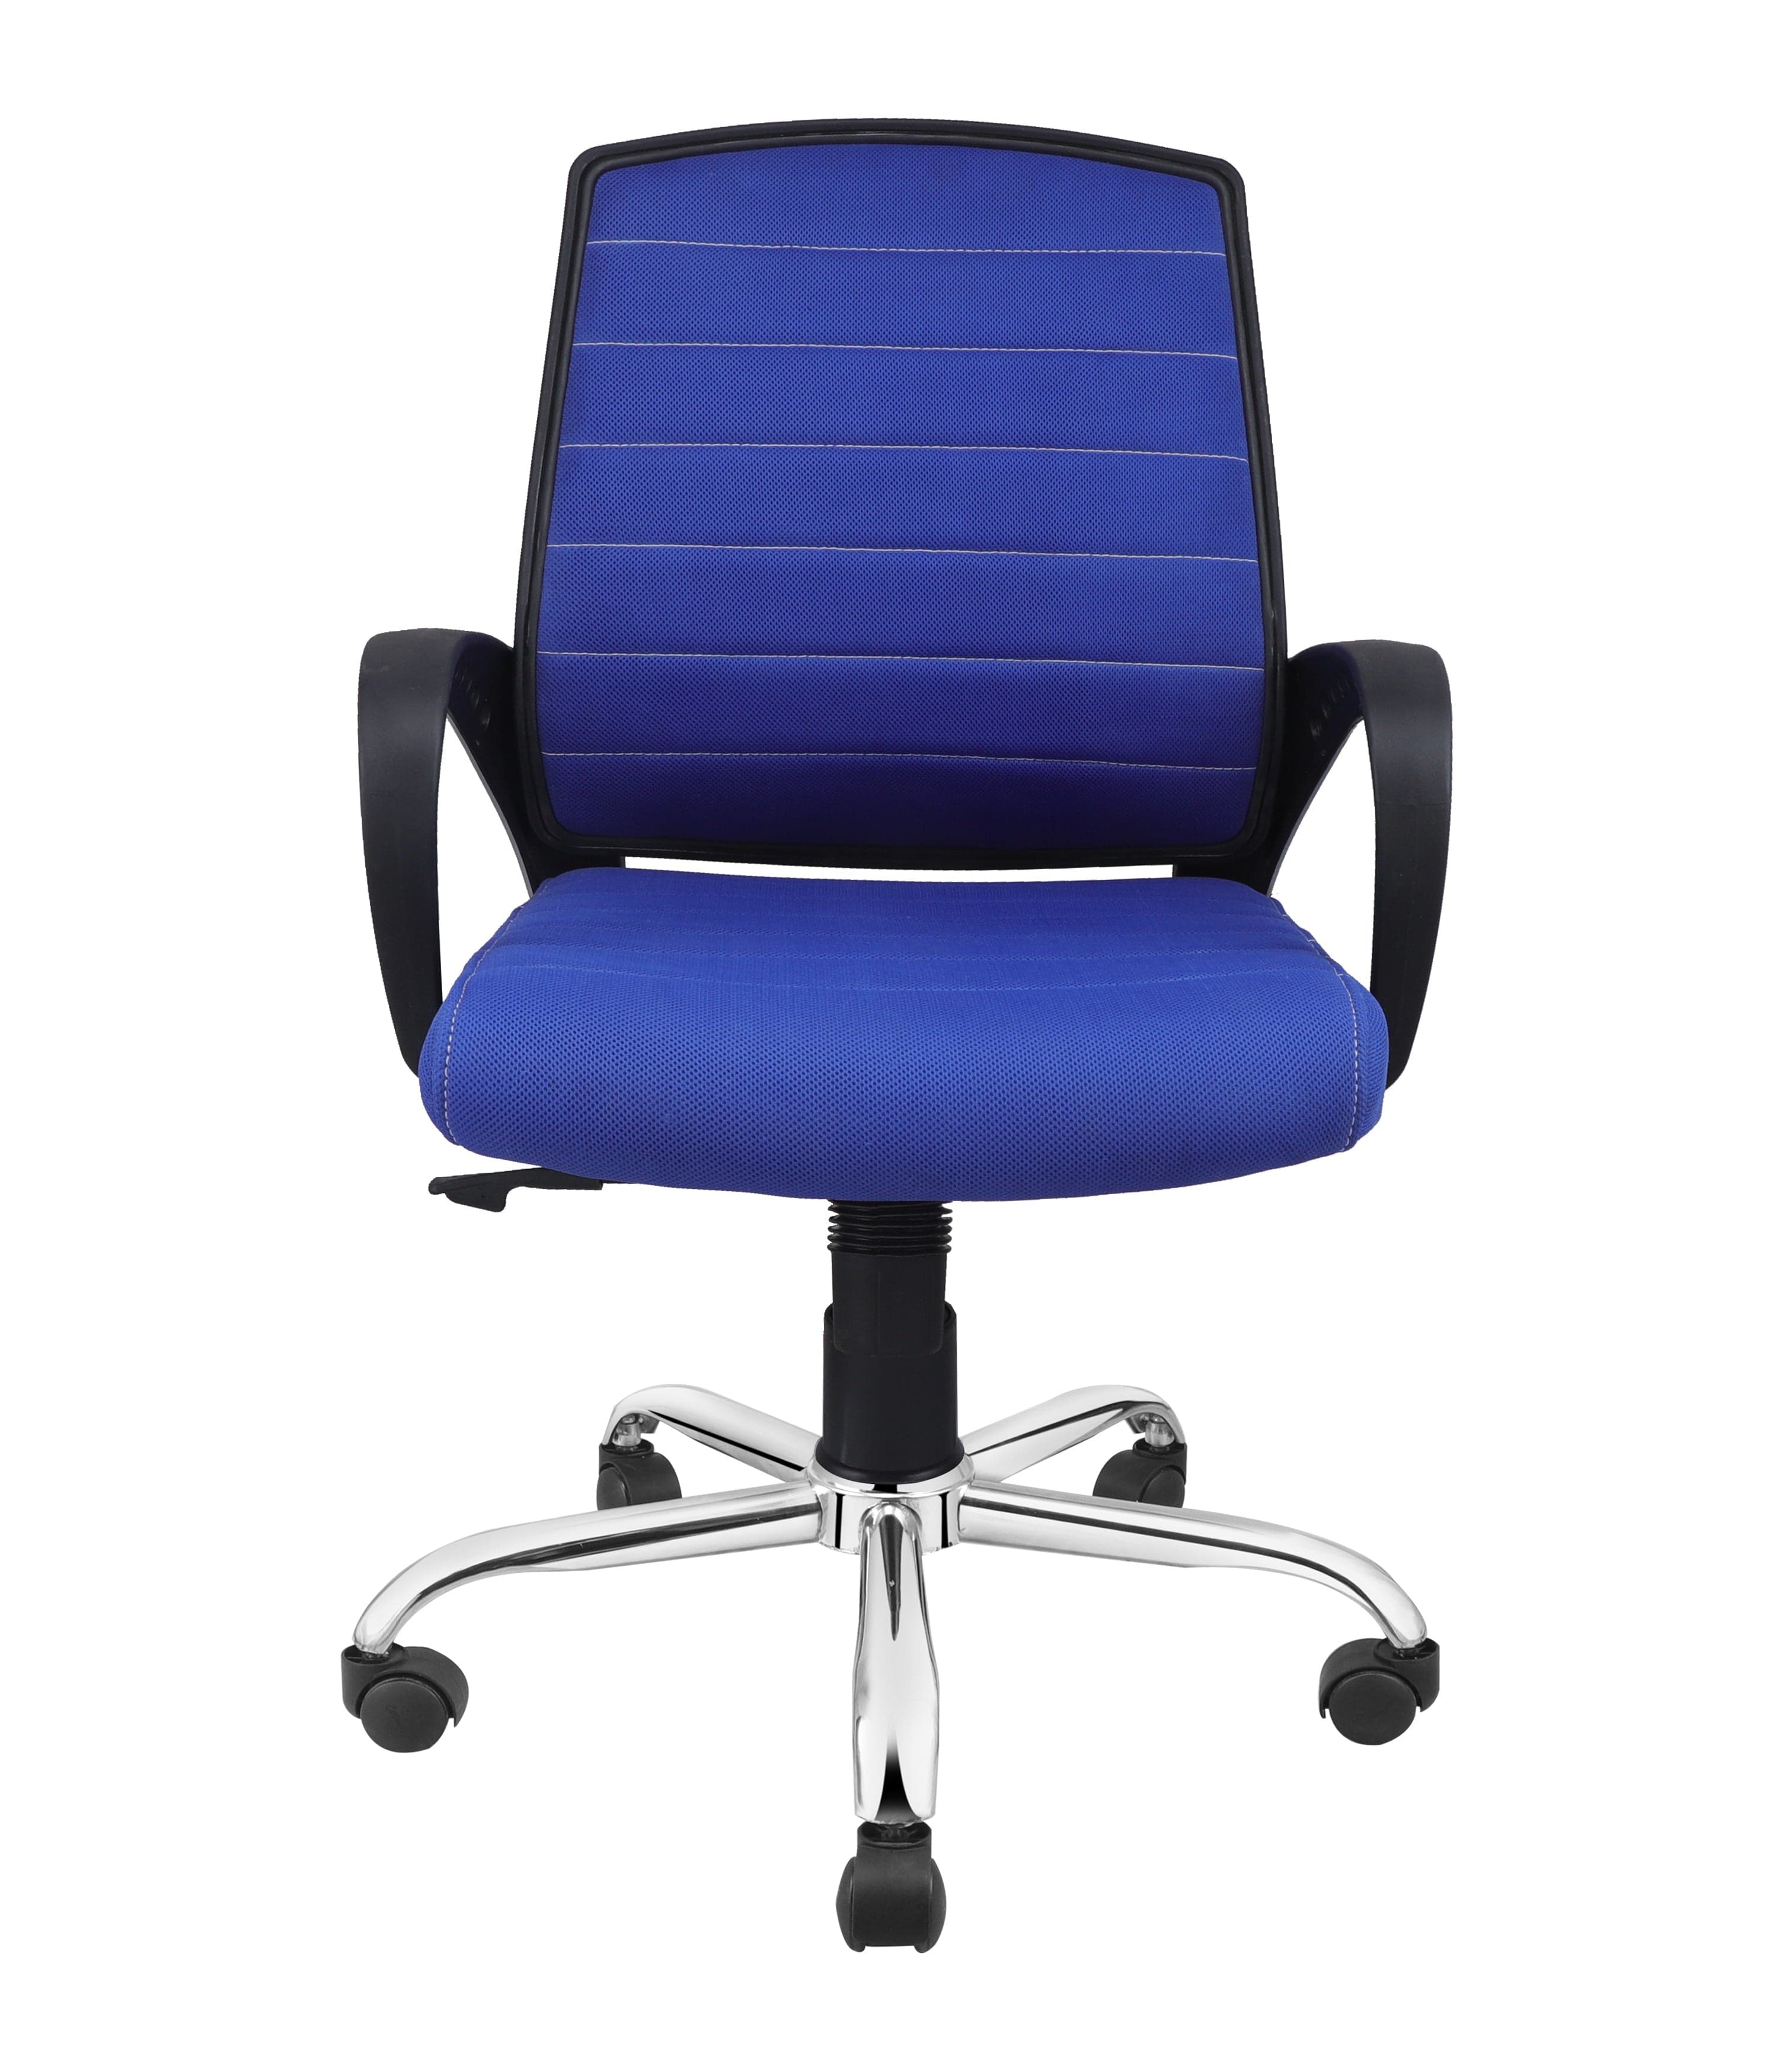 Smart Ergonomic Chair With Breathable Blue Mesh Fabric